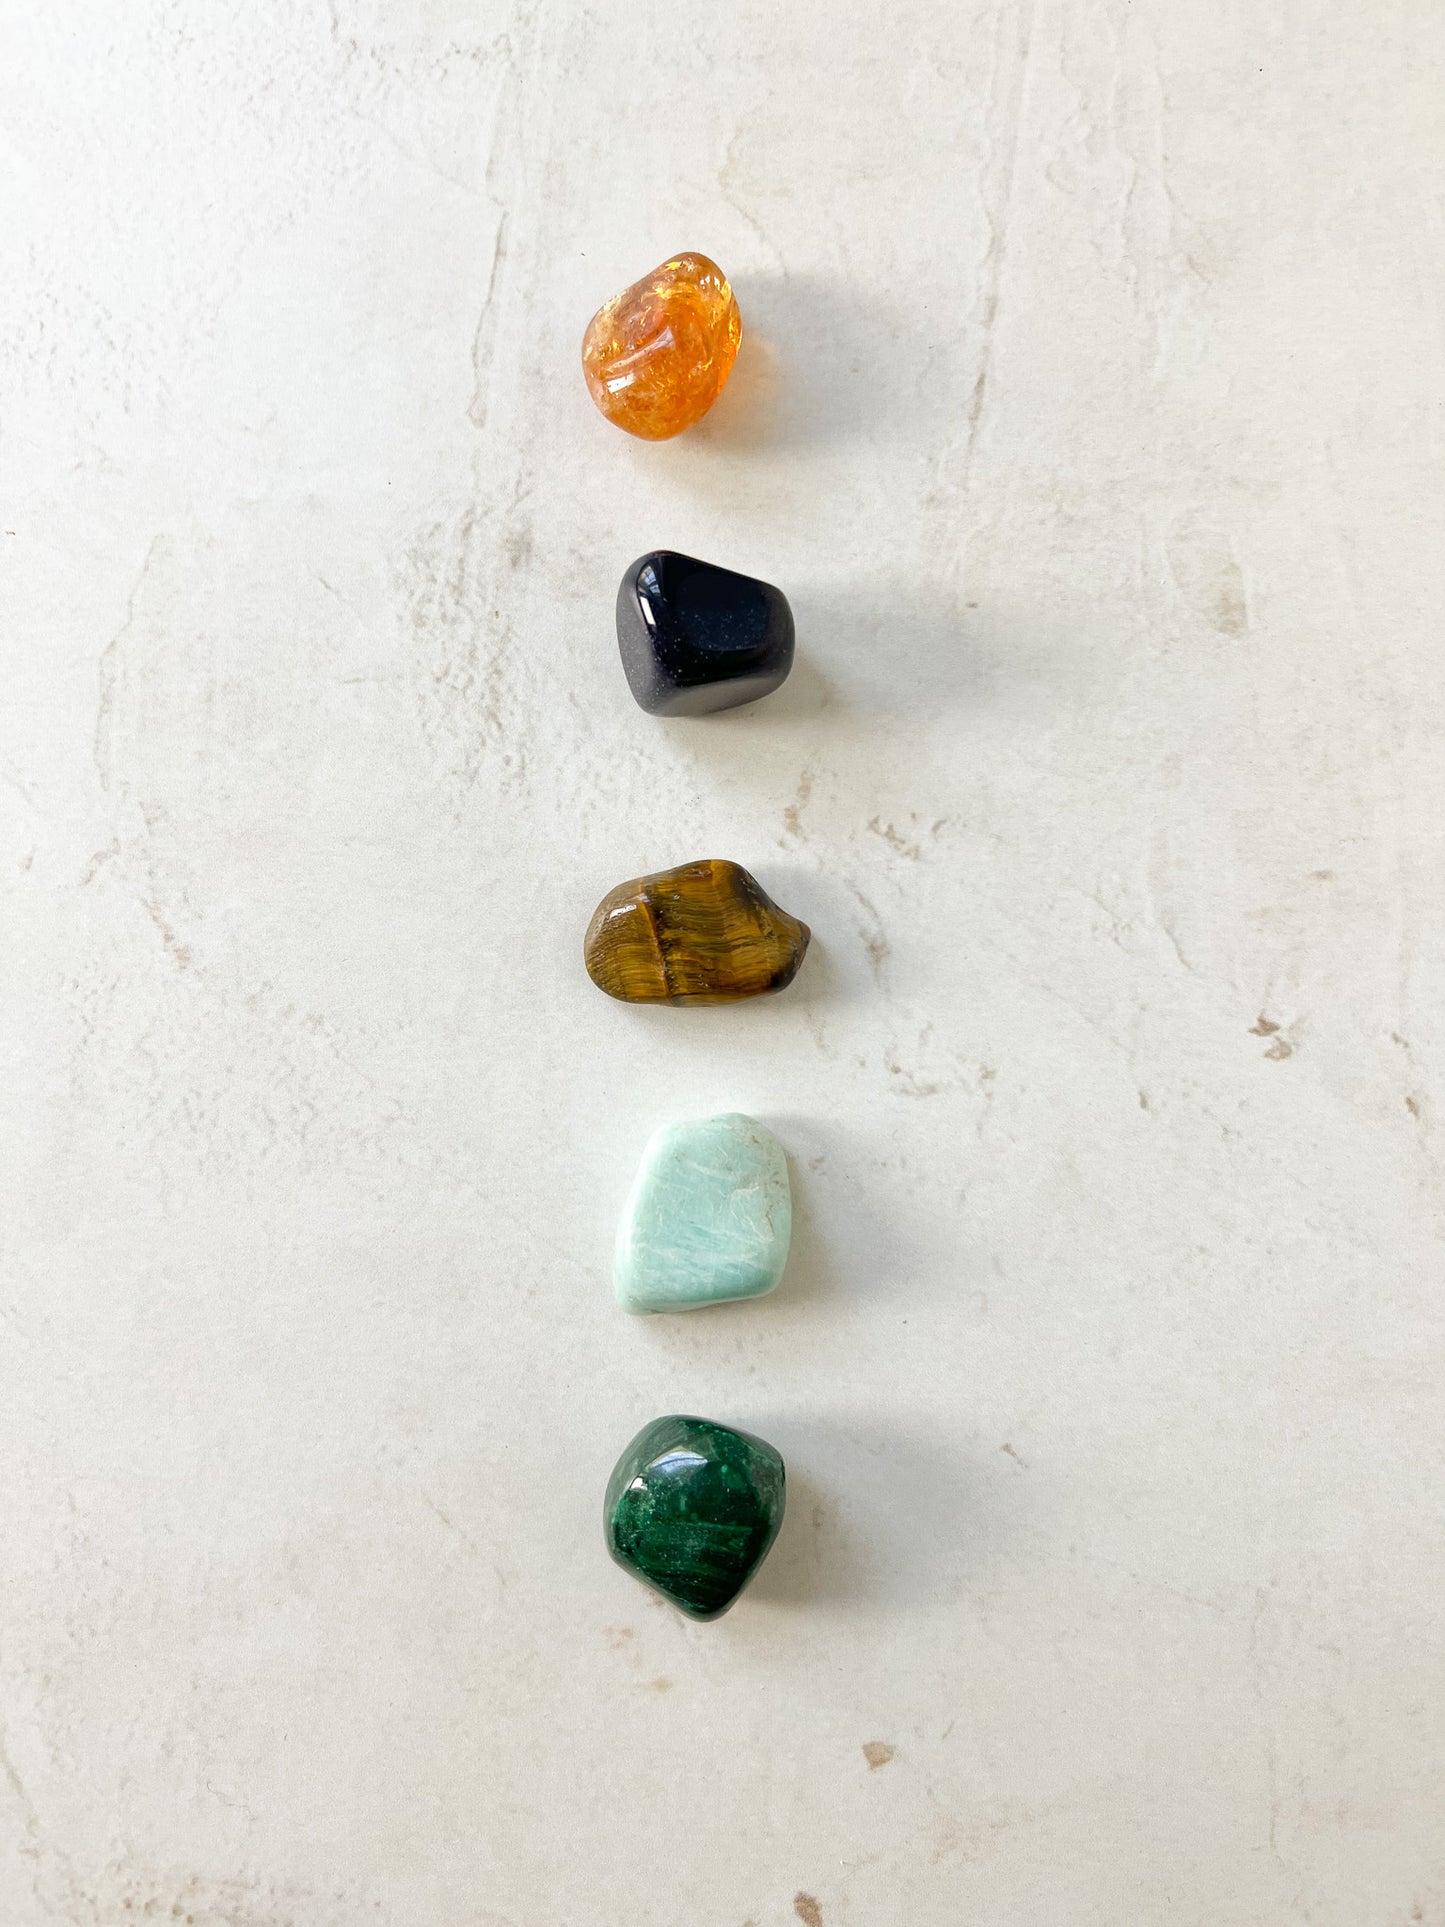 Stones of Good Fortune Crystals Set - Crystals for Wealth, Prosperity, and Abundance